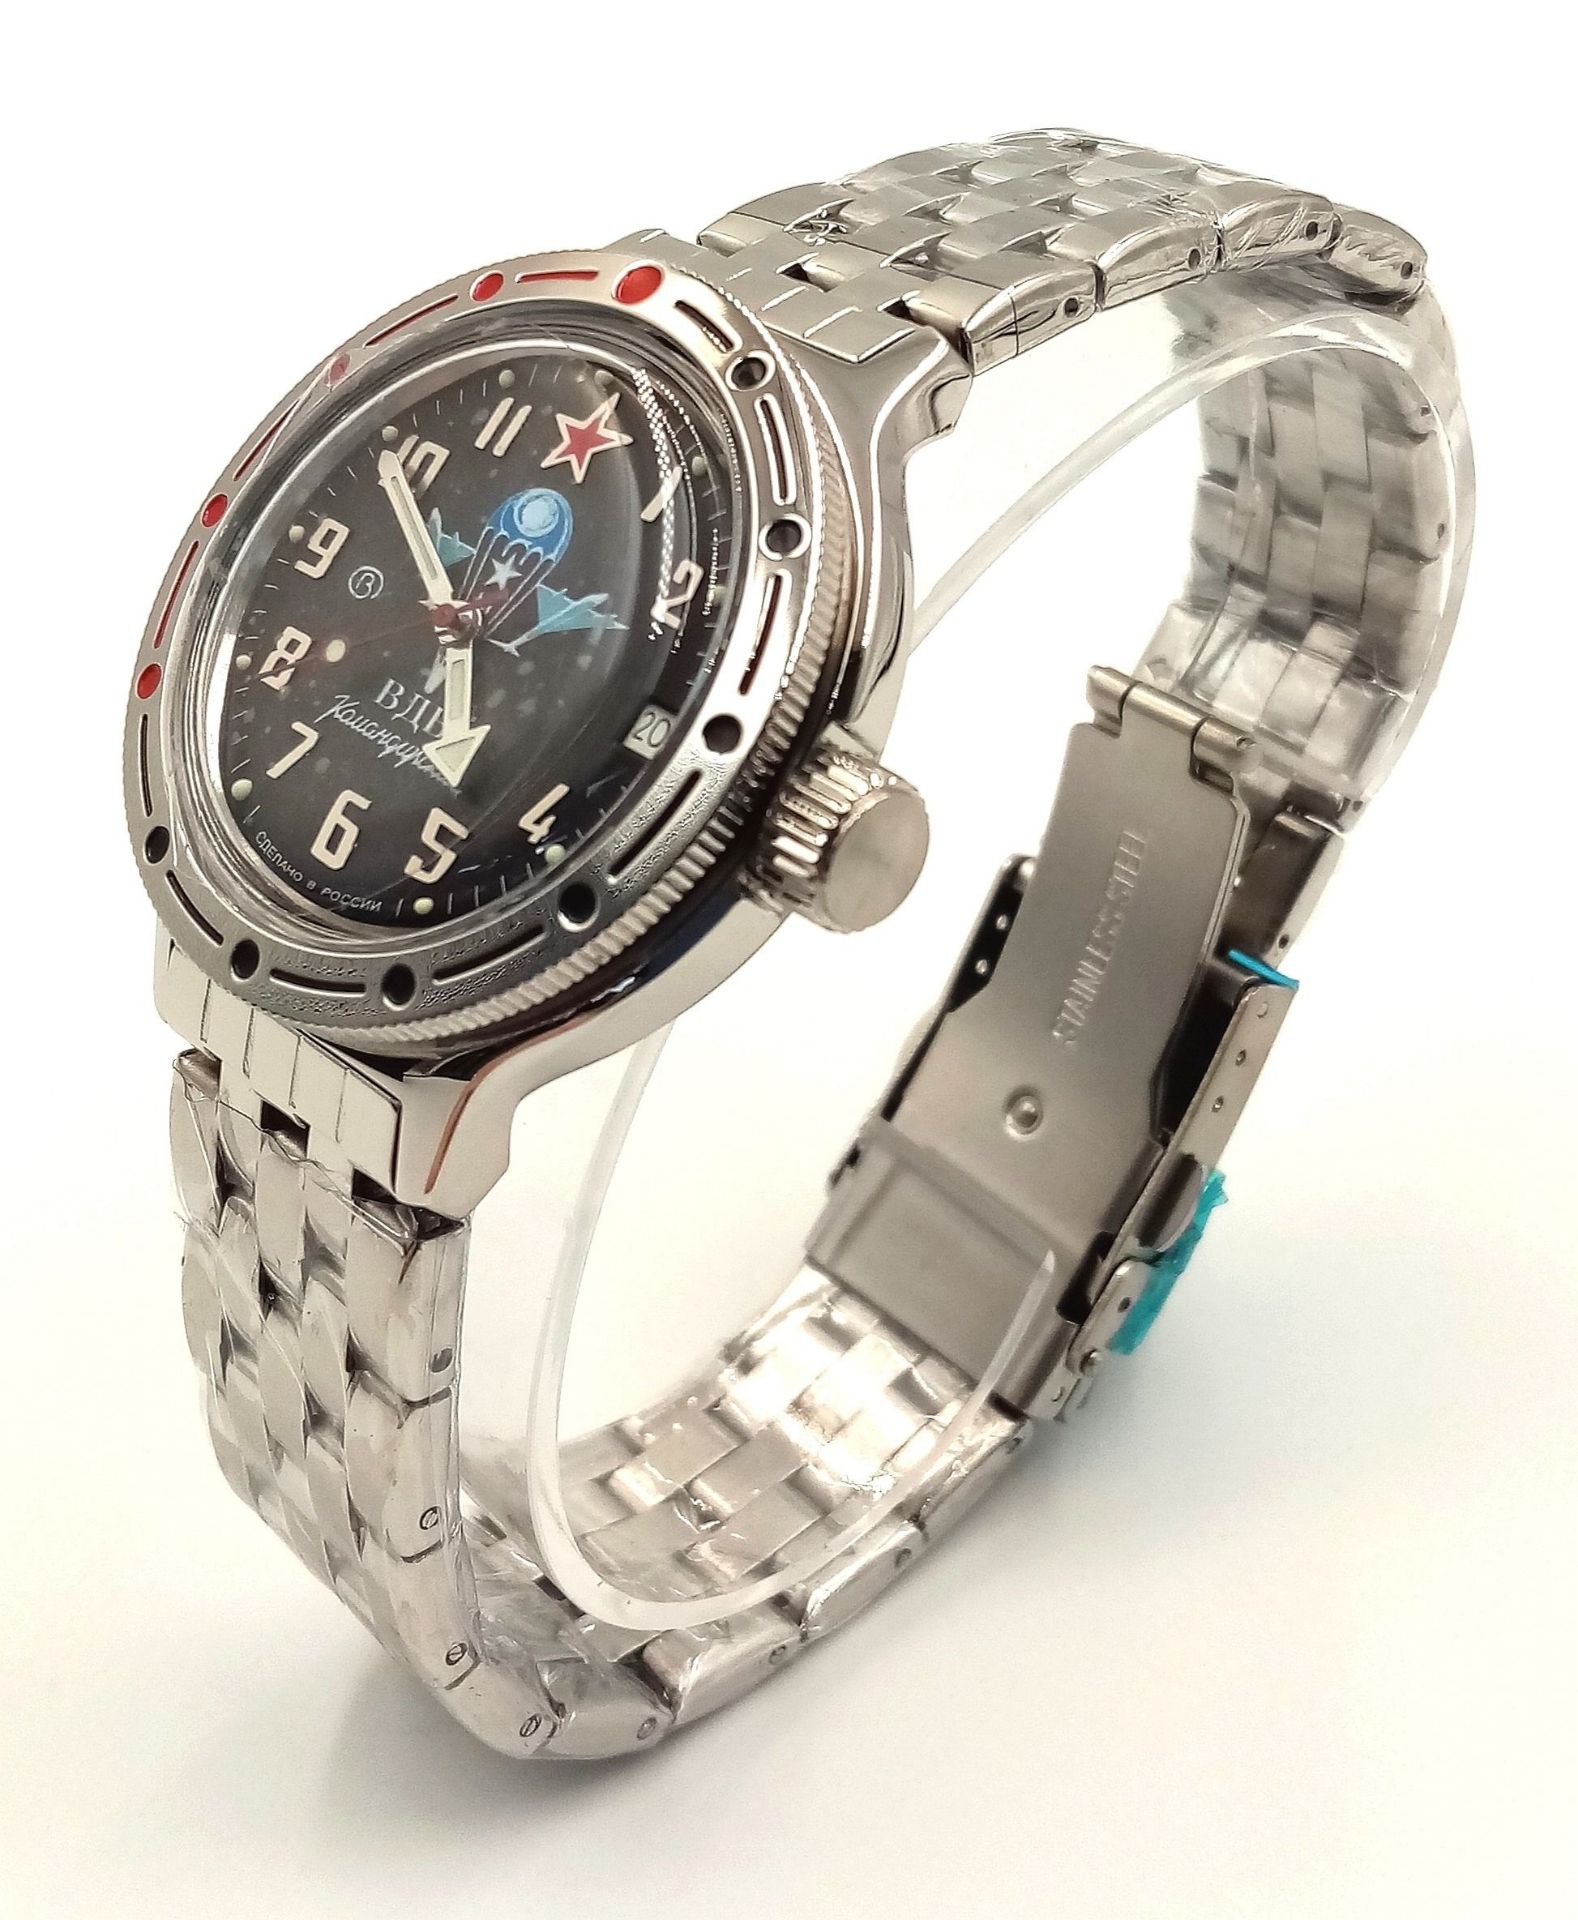 A Vostok Manual Gents Watch. Stainless steel bracelet and case - 40mm. Black dial with date - Bild 2 aus 6